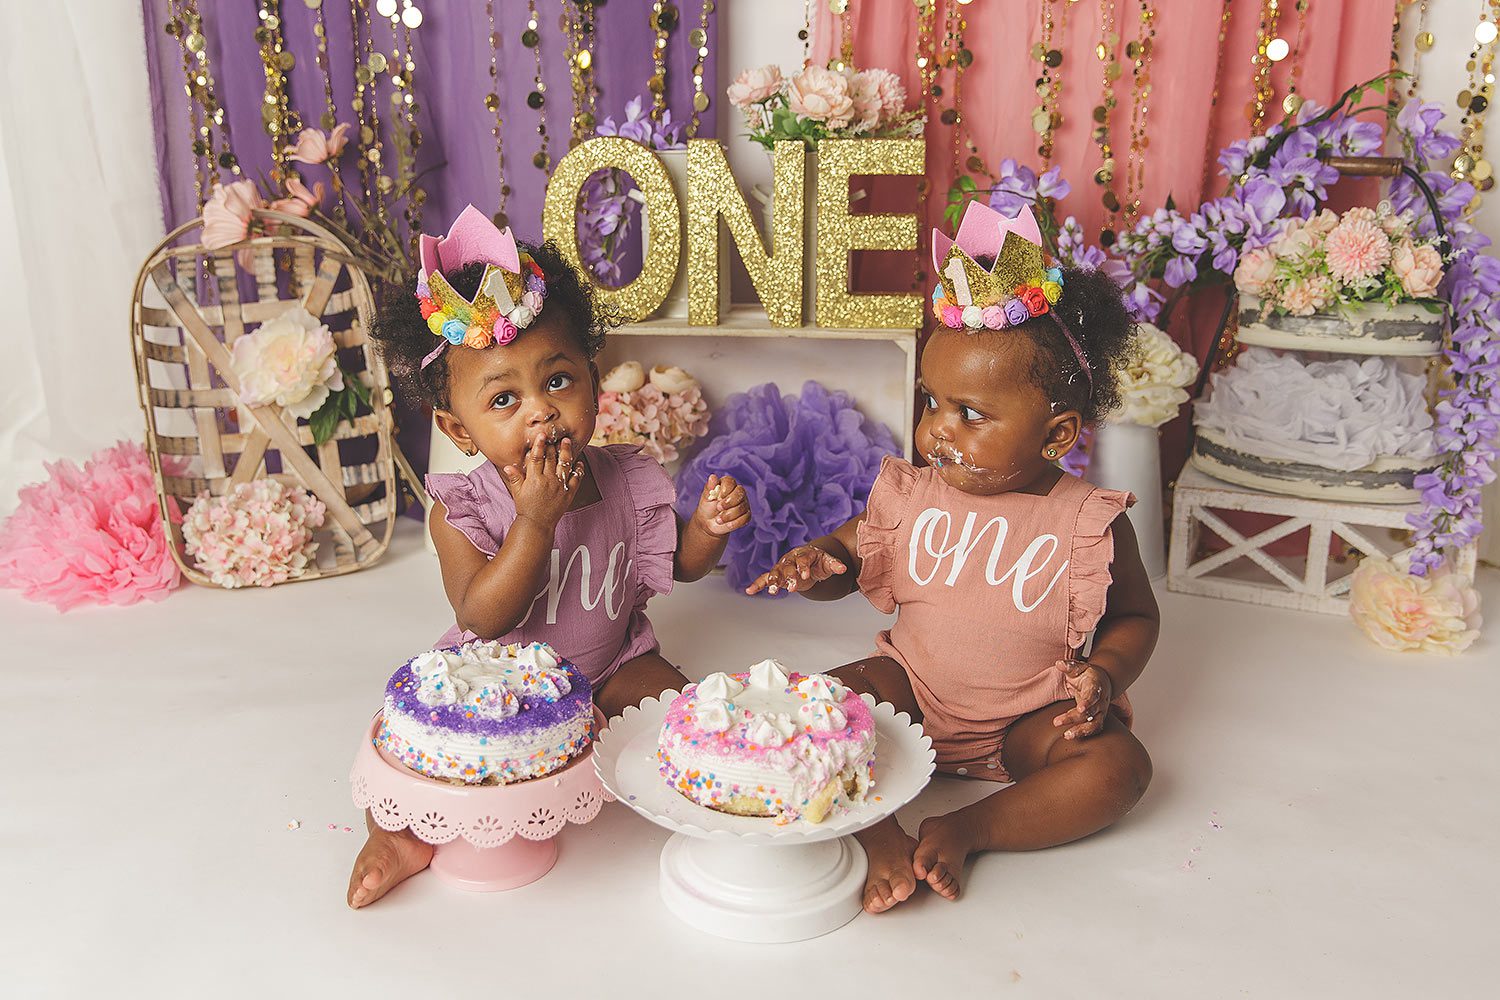 studio set with Black twin one year old girls in pink and purple with cakes, one is putting her hand to her mouth, while the other is looking shocked